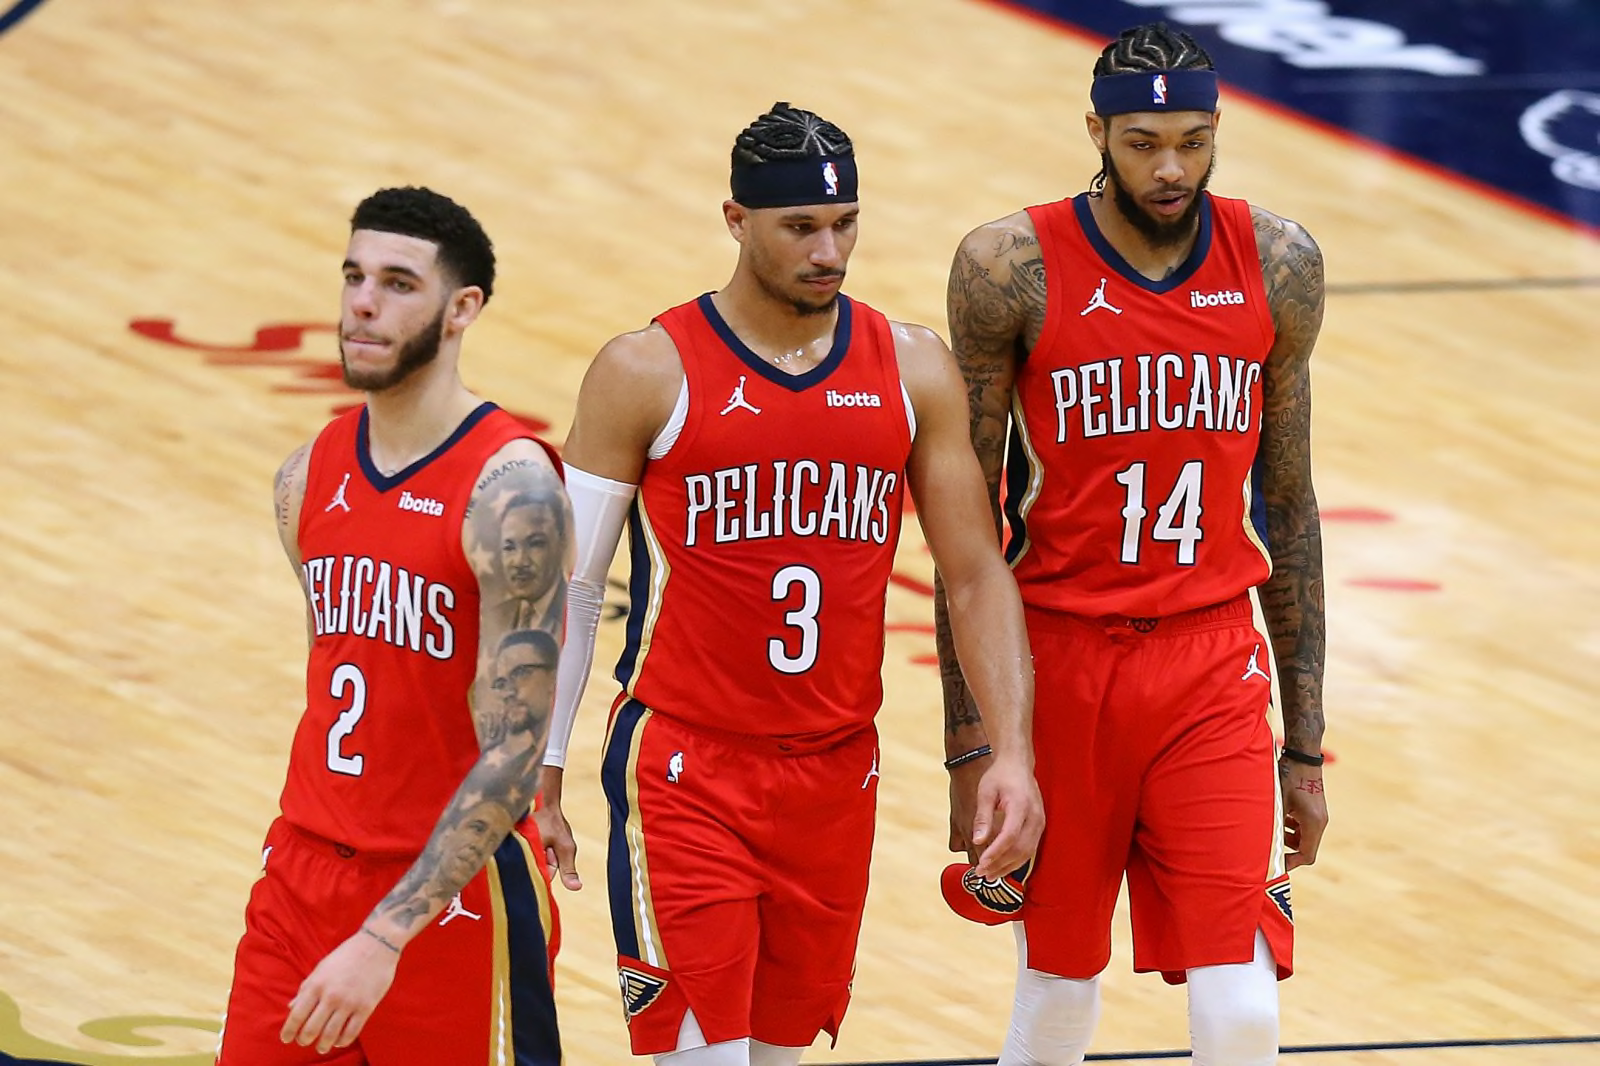 New Orleans Pelicans 2 good players on bad teams the Pels could target